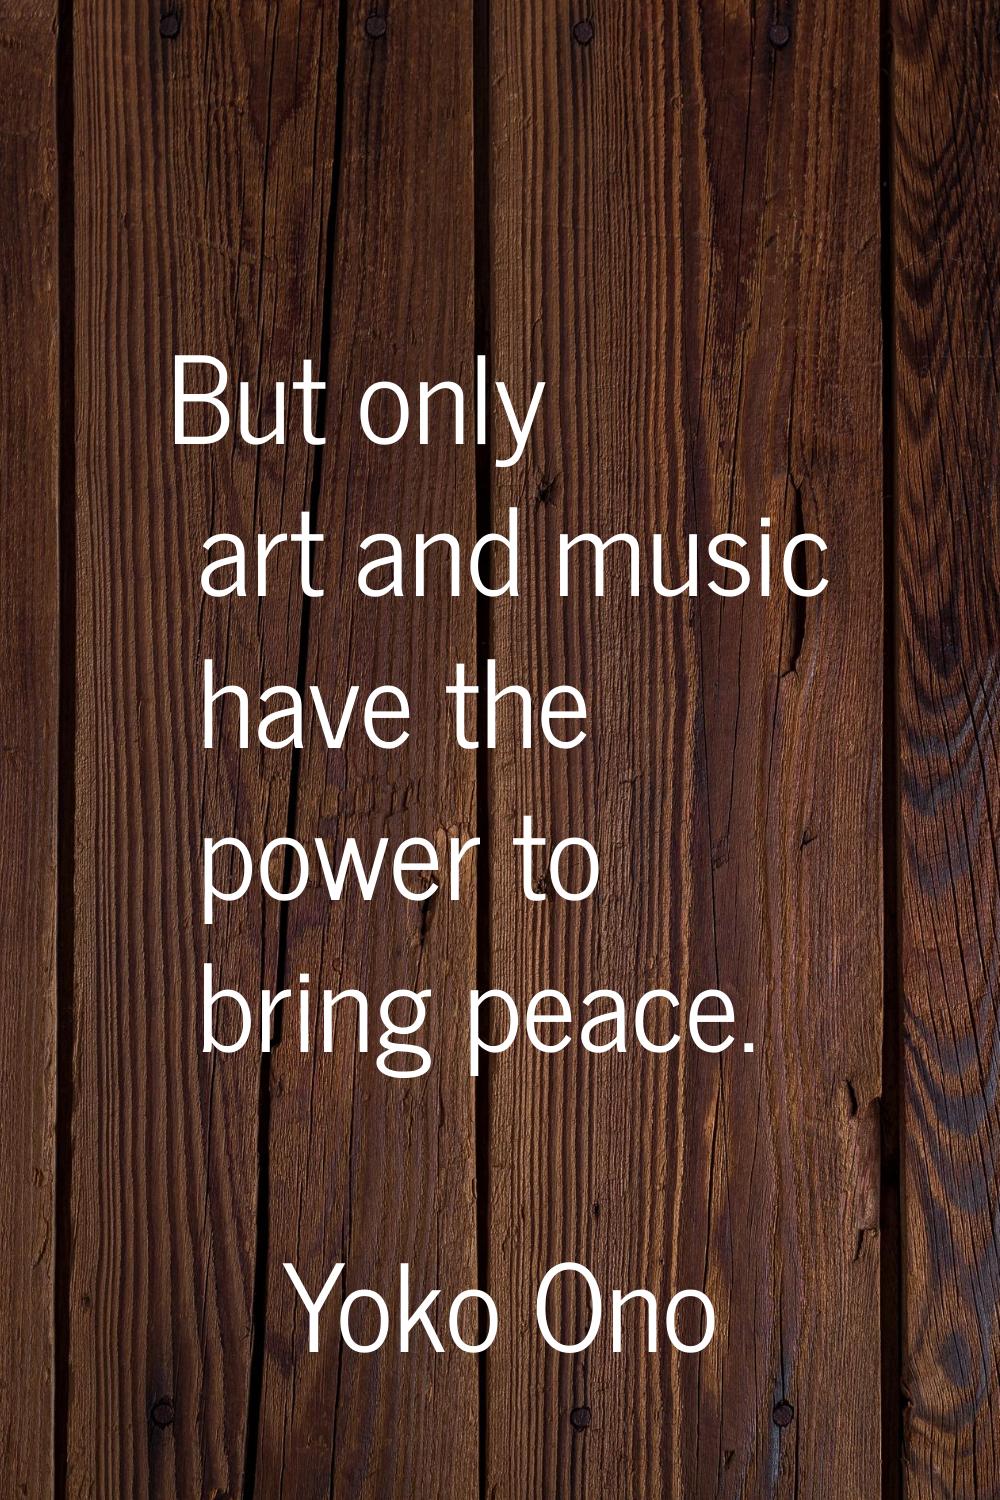 But only art and music have the power to bring peace.